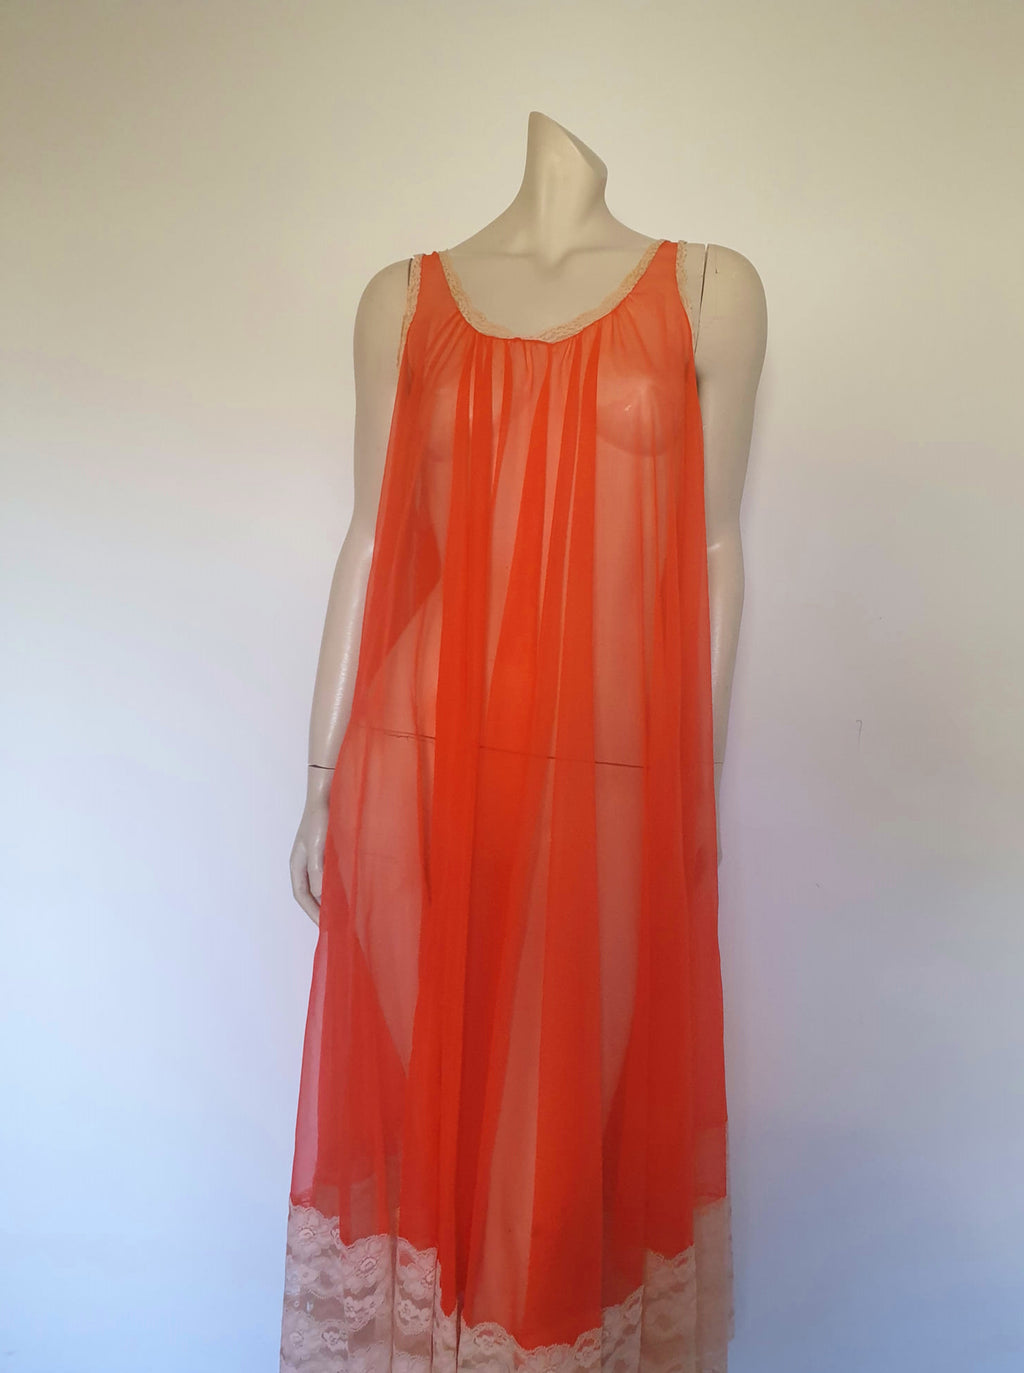 1960s vintage sheer red negligee with lace